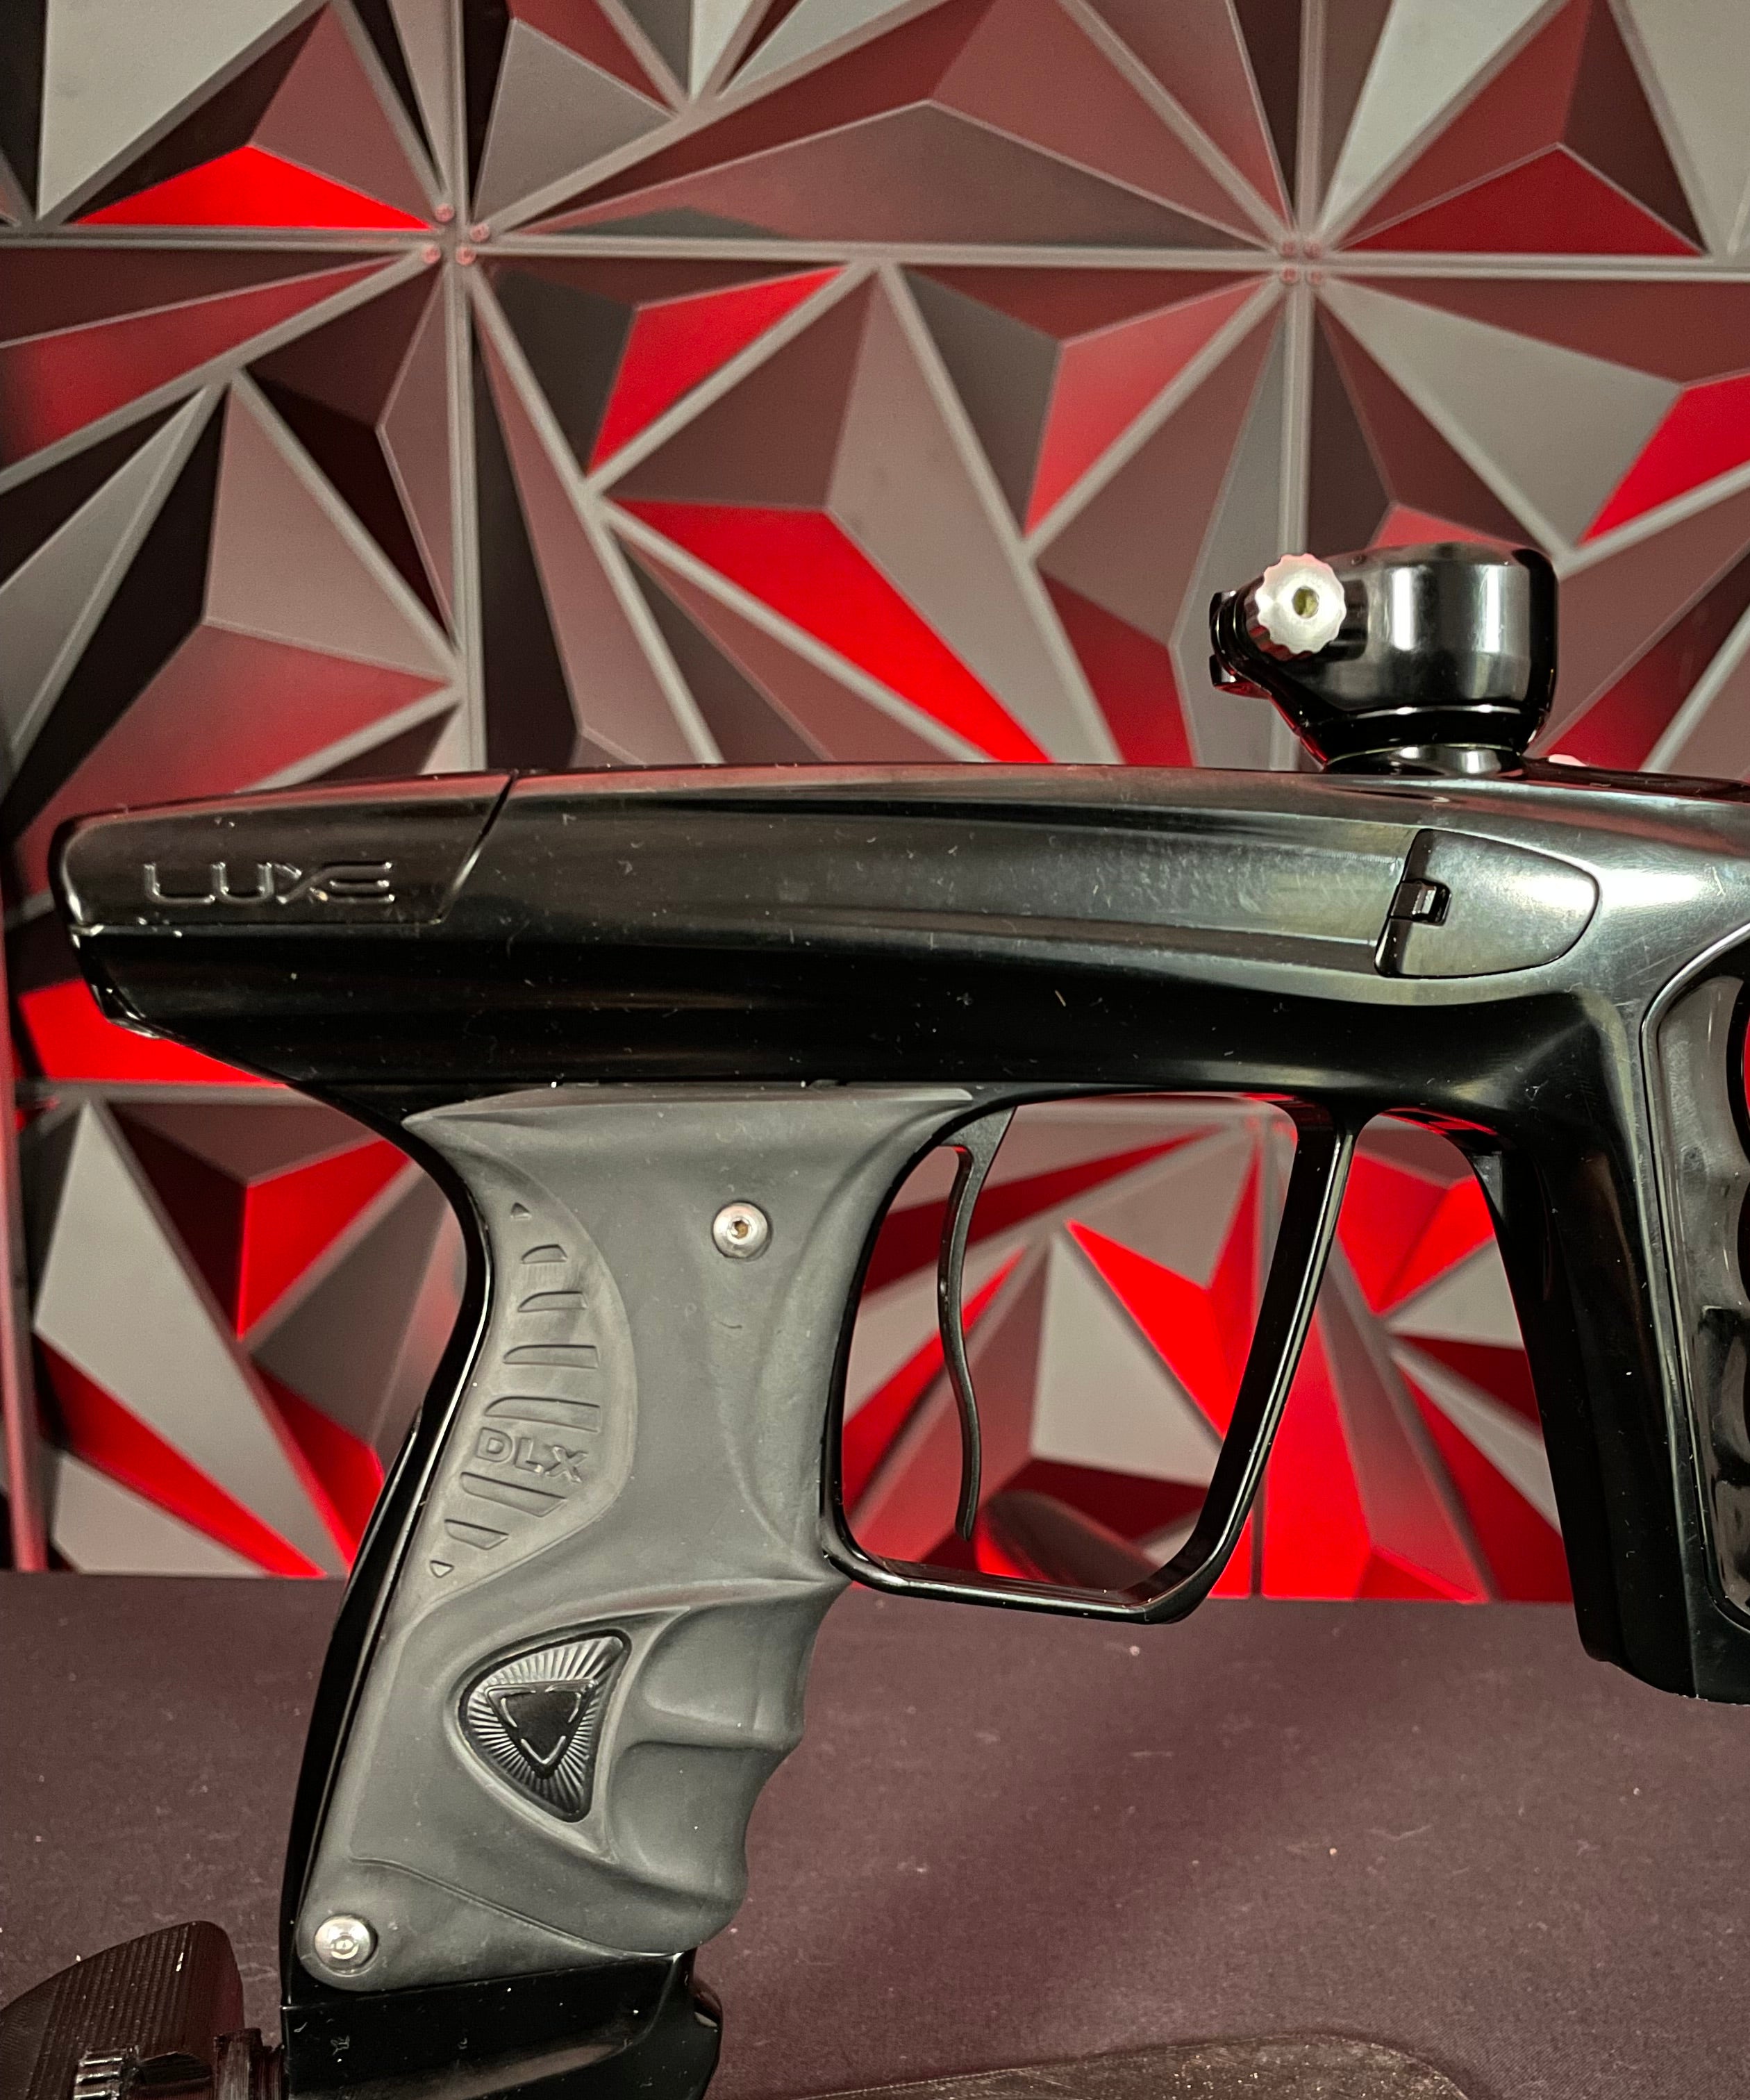 Used DLX Luxe X Paintball Gun - Polished Black